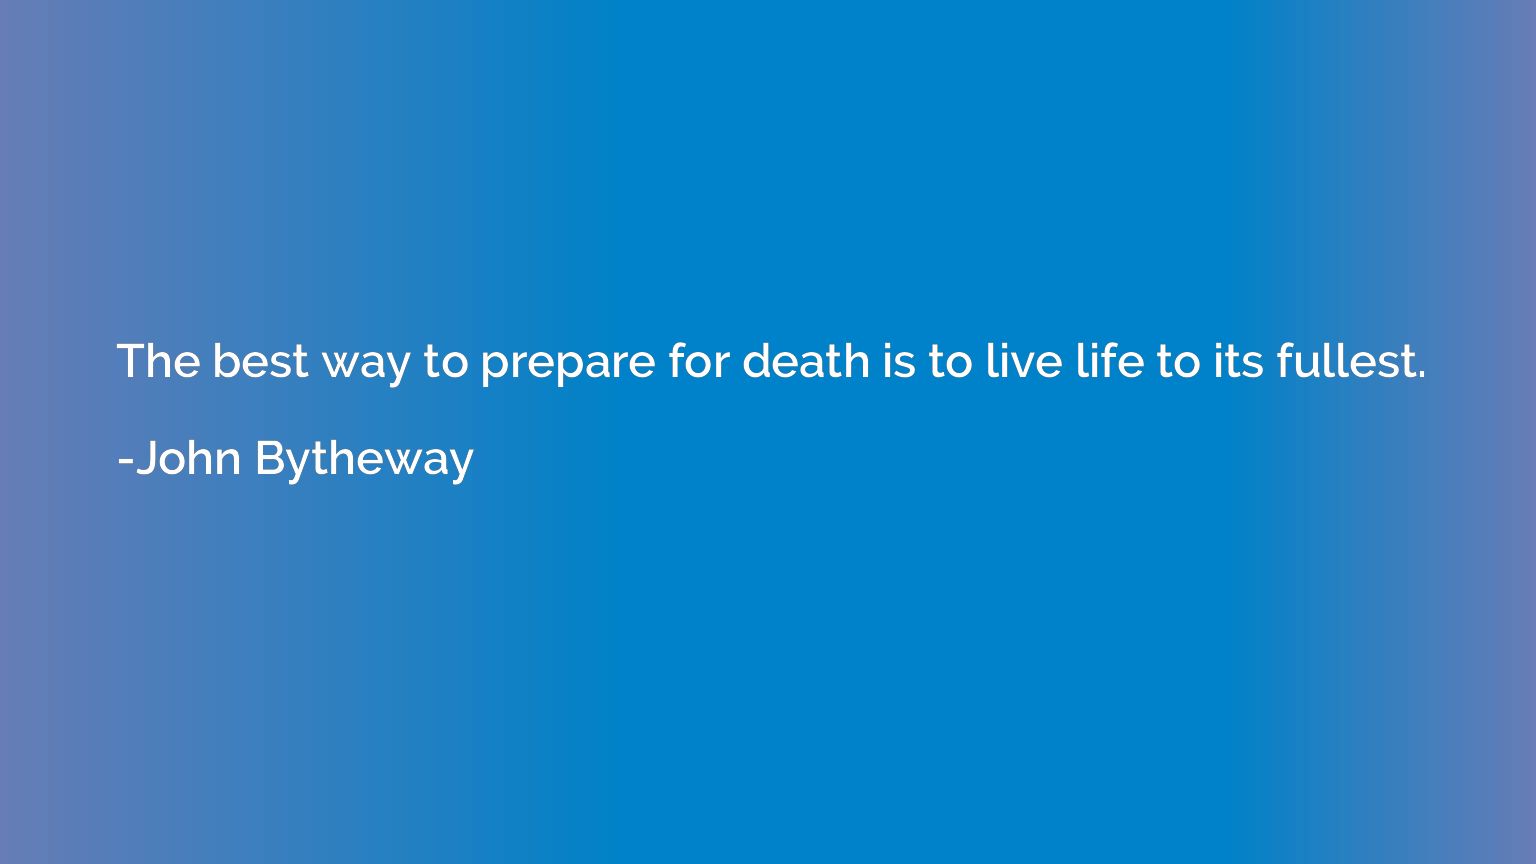 The best way to prepare for death is to live life to its ful